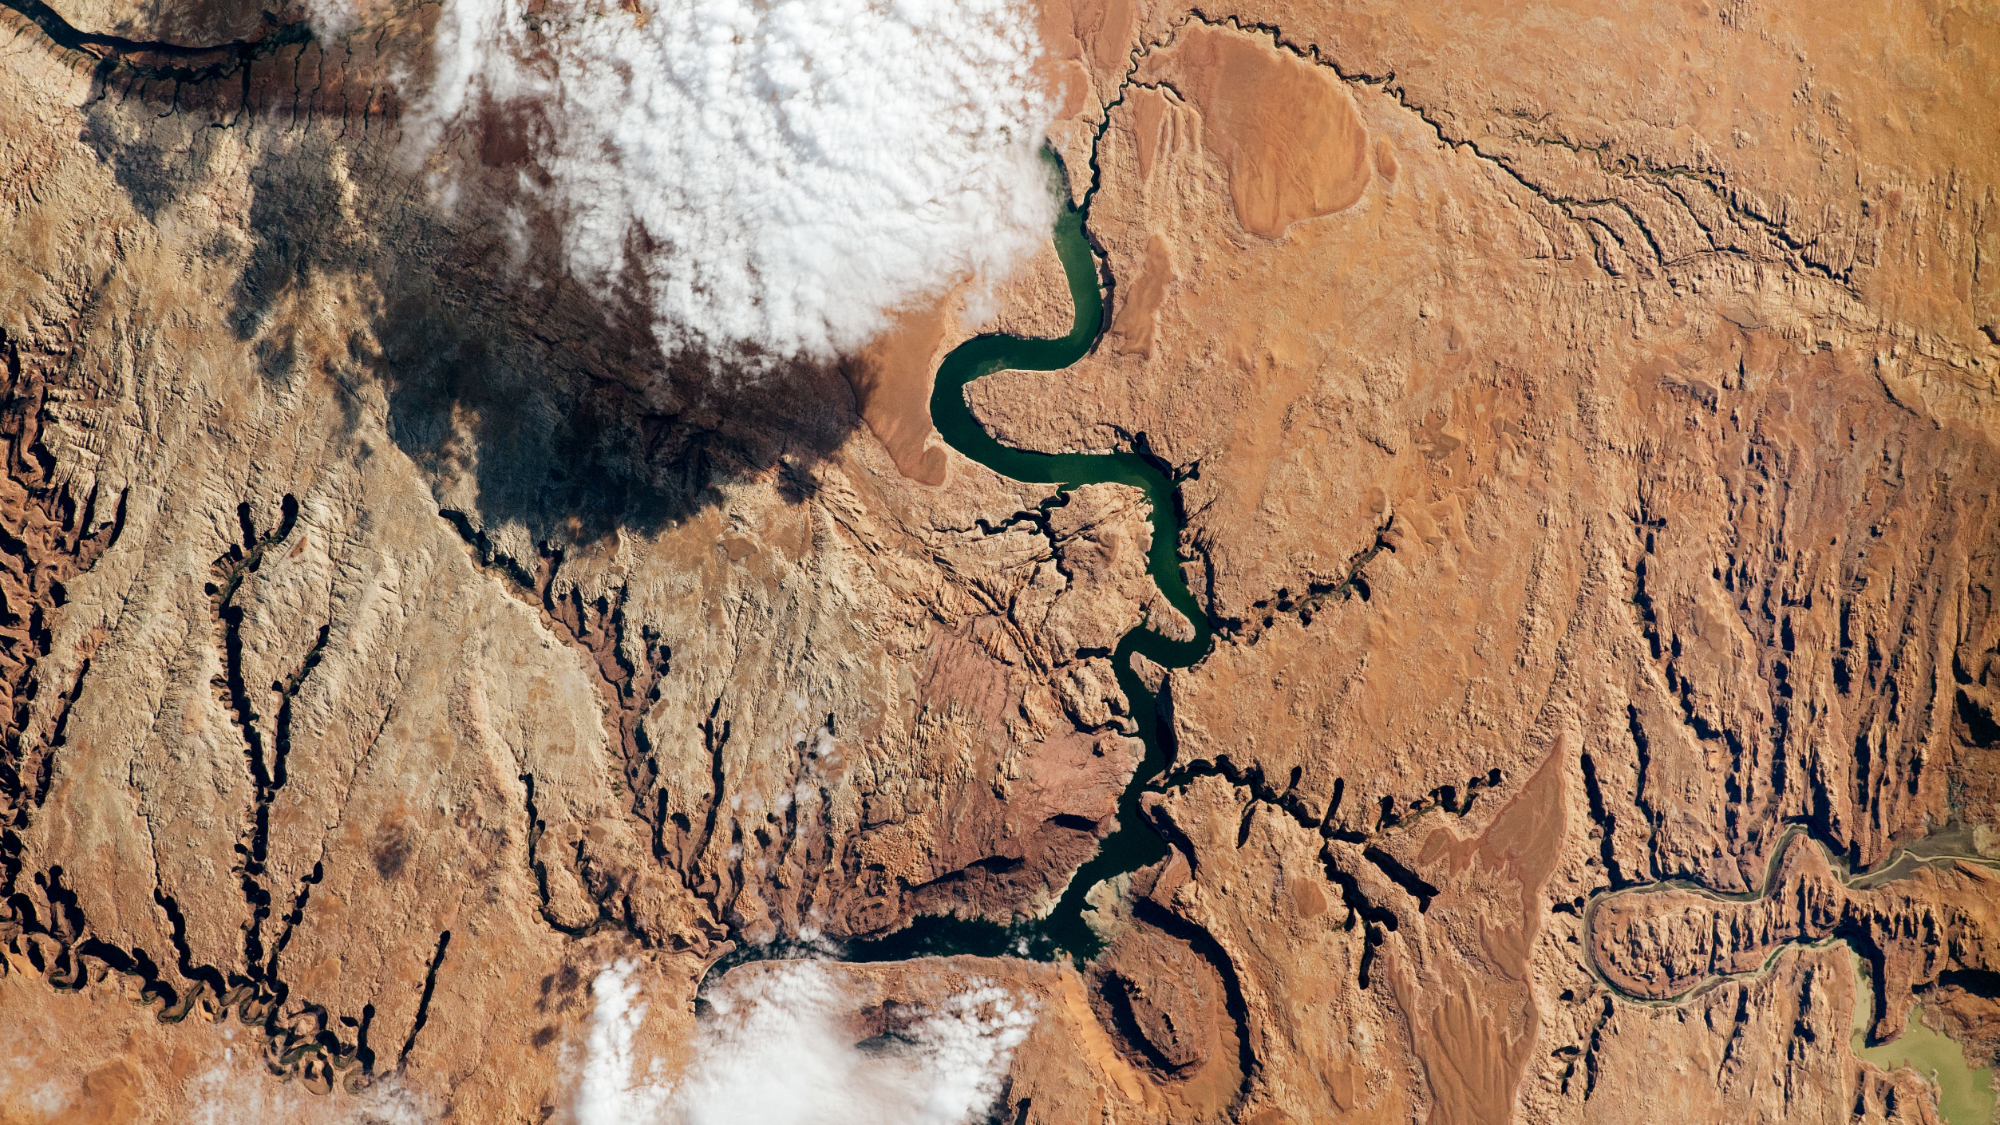 Scientists are mapping Earth’s rivers from space before climate change devastates our planet Space